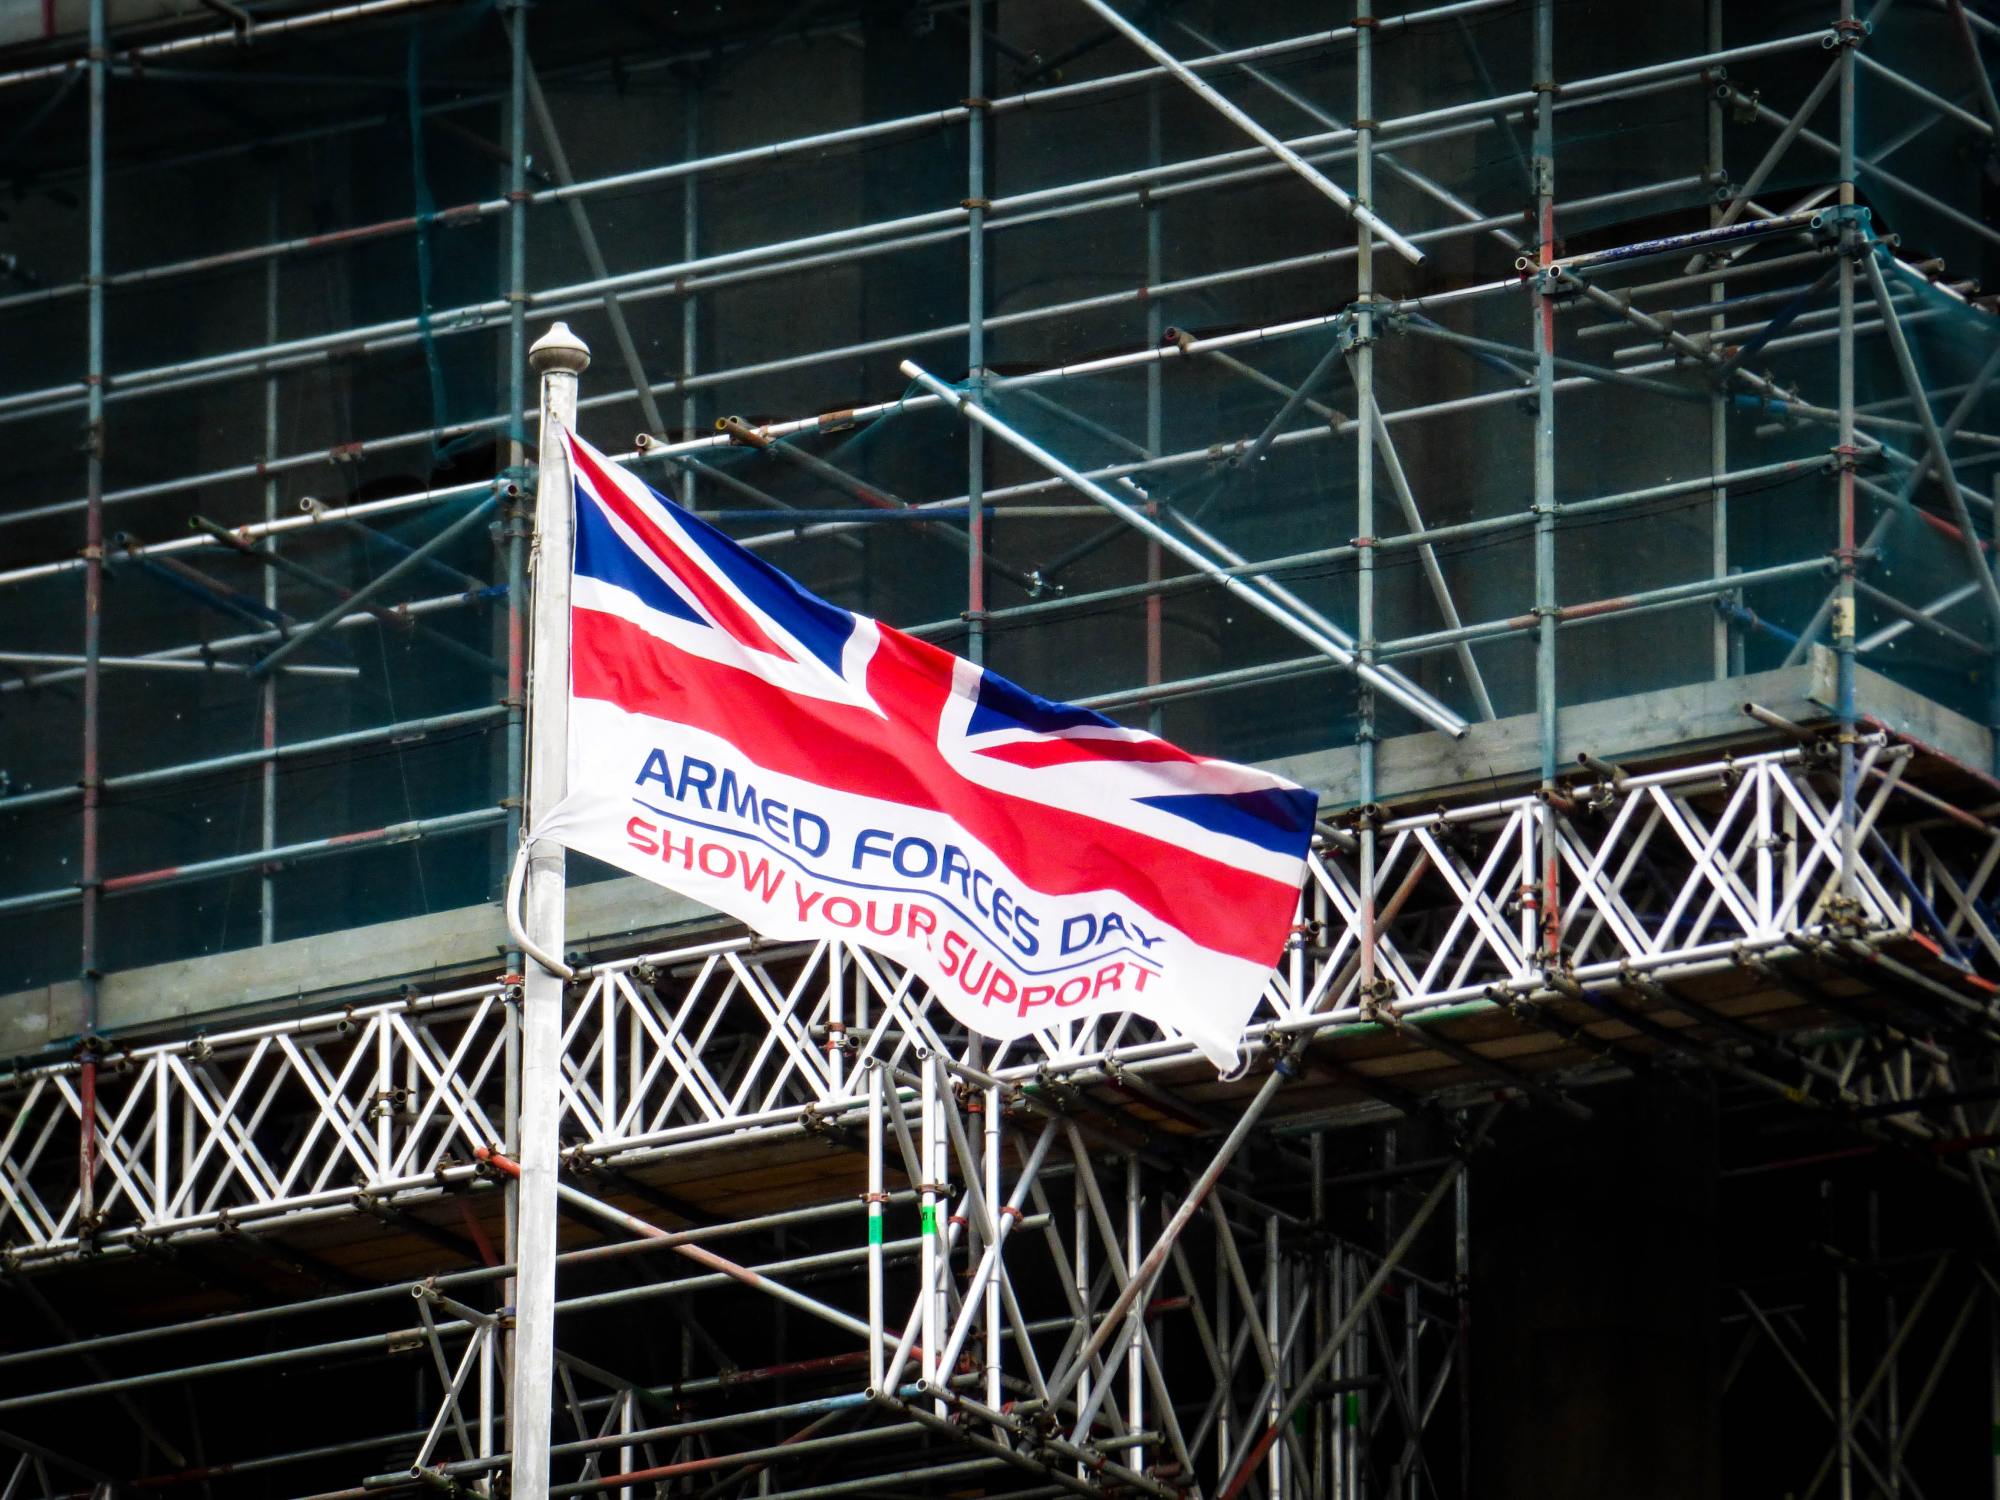 Armed Forces Day Banner